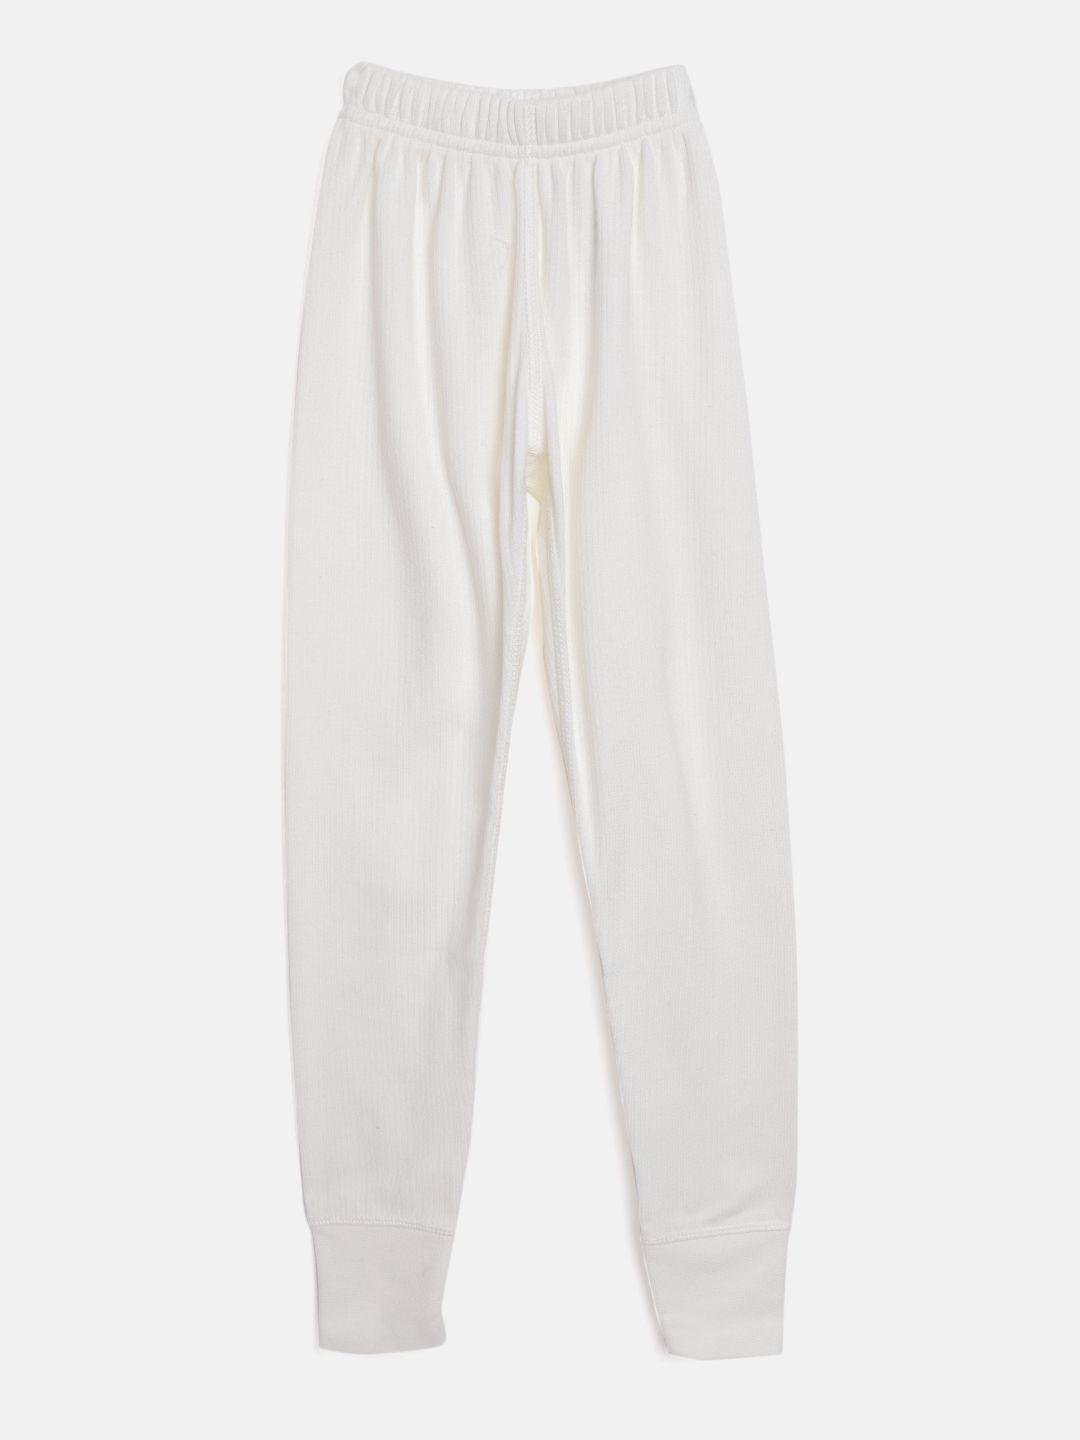 jockey-kids-off-white-combed-cotton-solid-thermal-bottoms